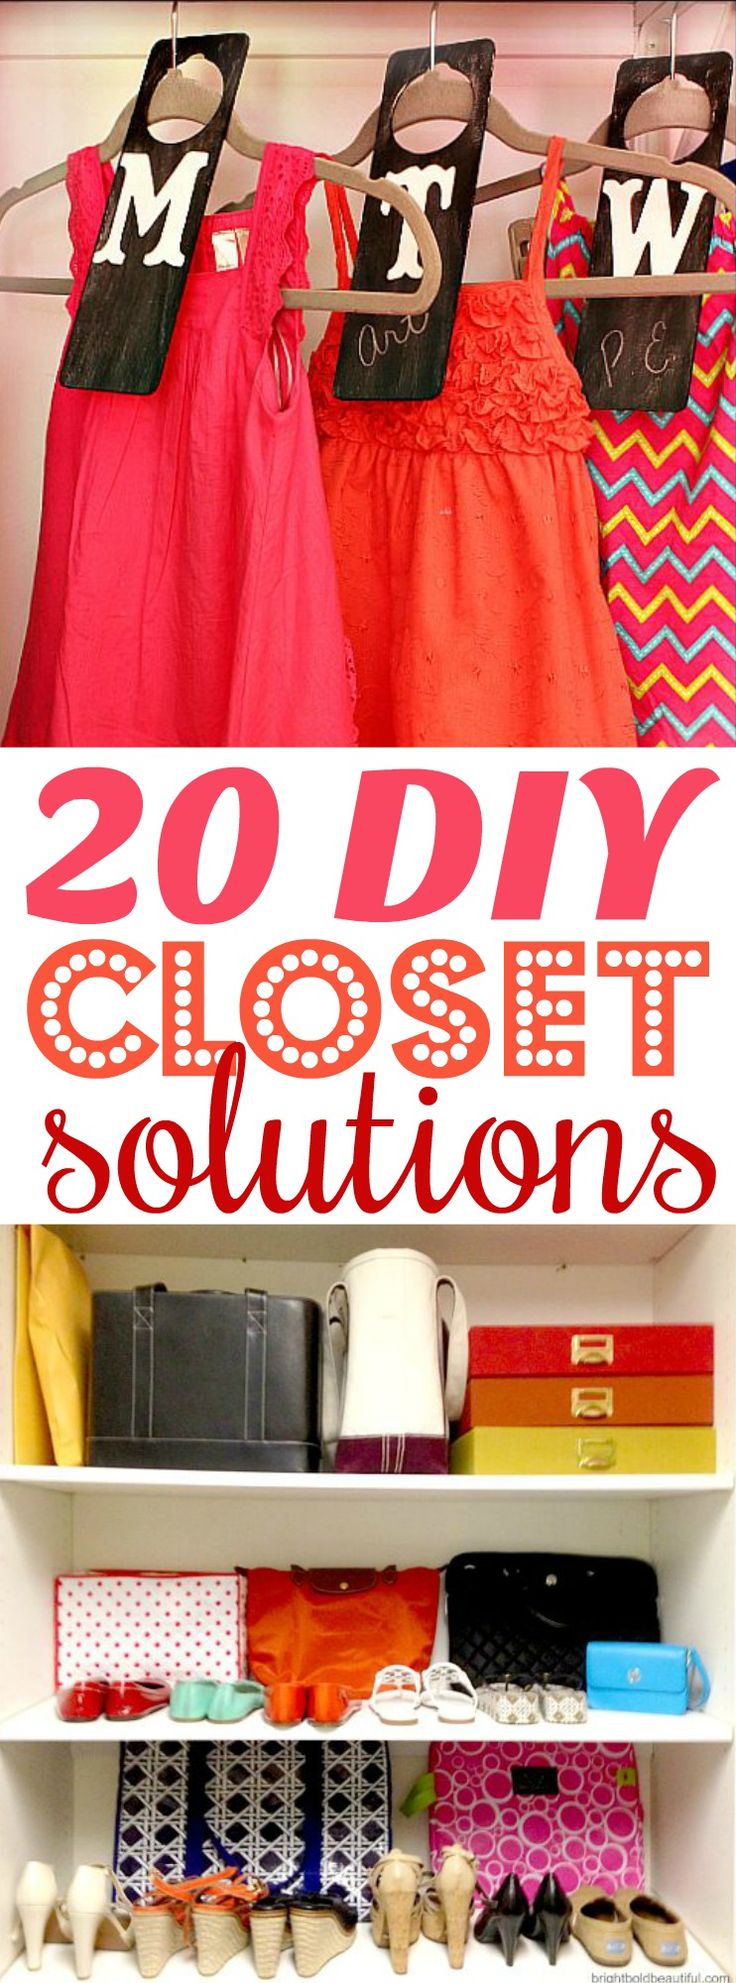 today I wanted to share with you guys some of my favorite ideas for 20 DIY Close...